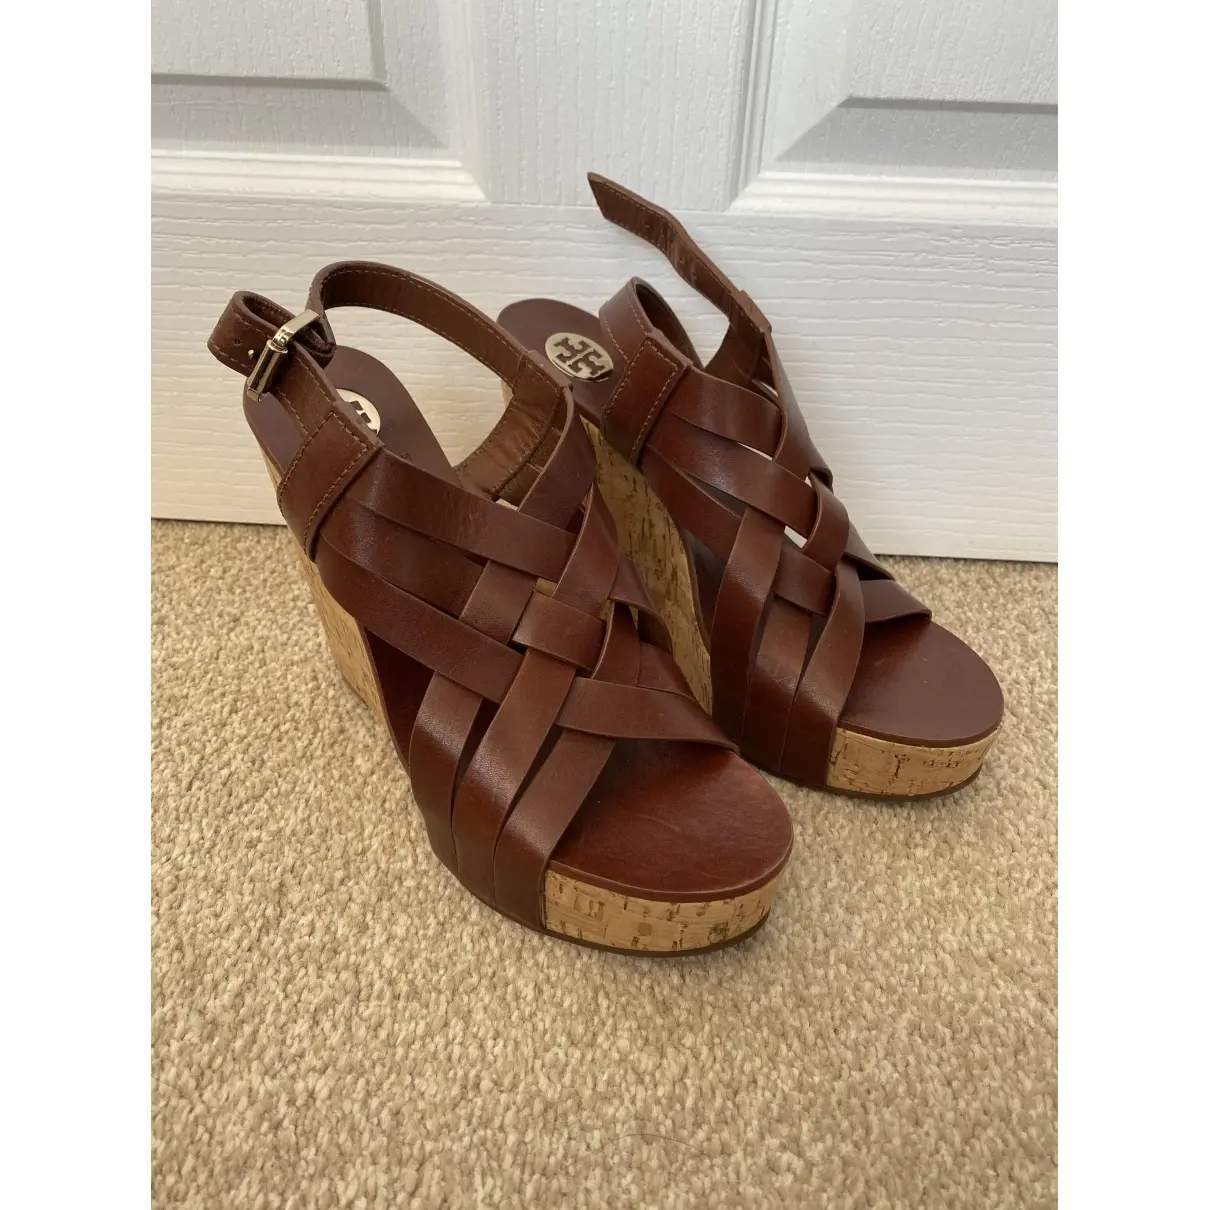 Tory Burch Leather sandals for sale